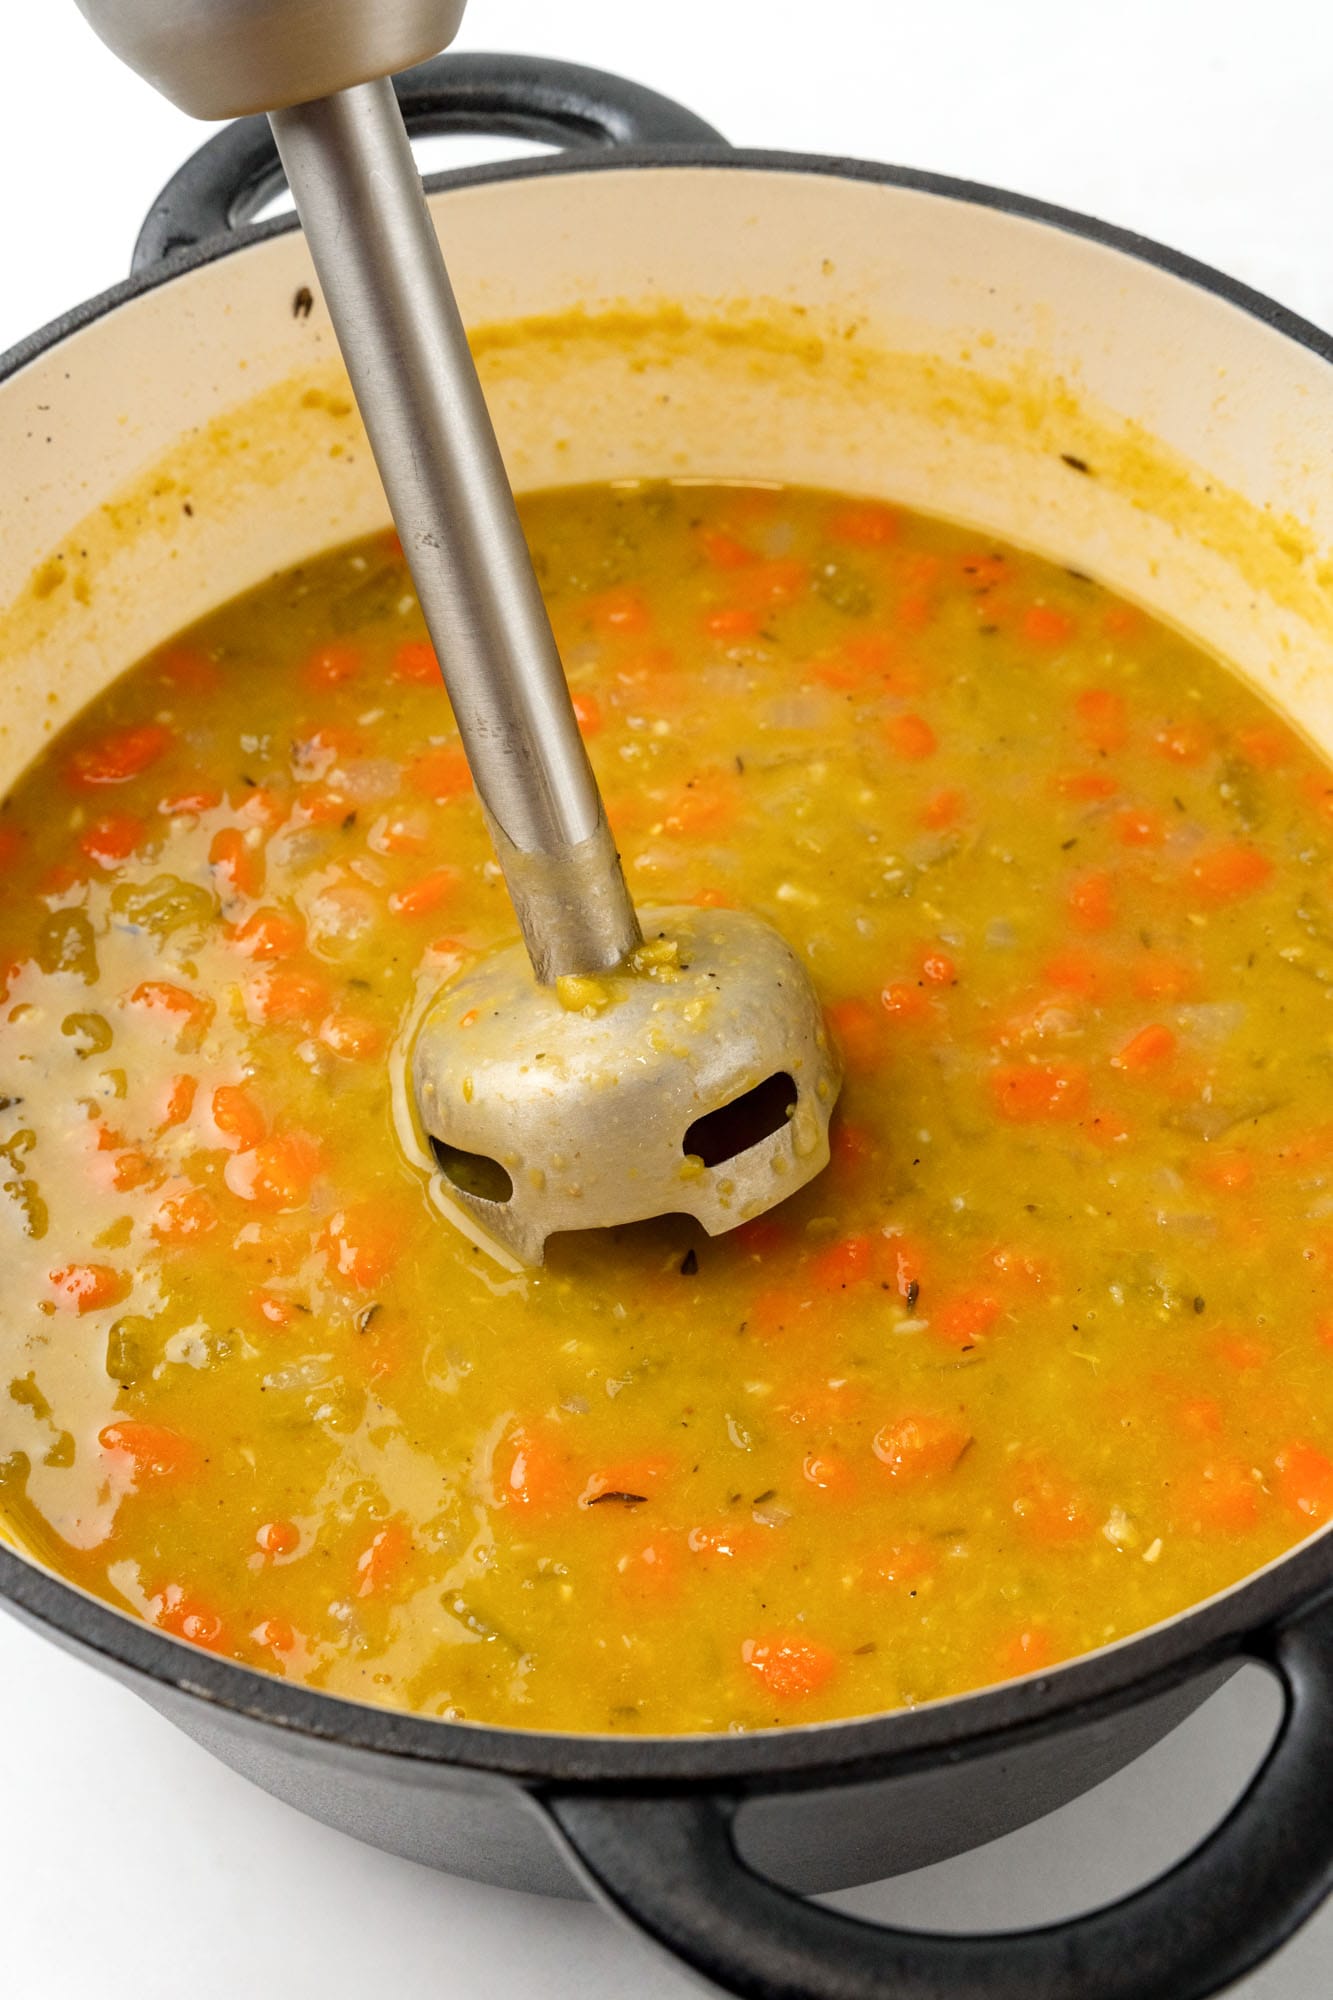 a dutch oven of split pean soup pureed with a hand blender.